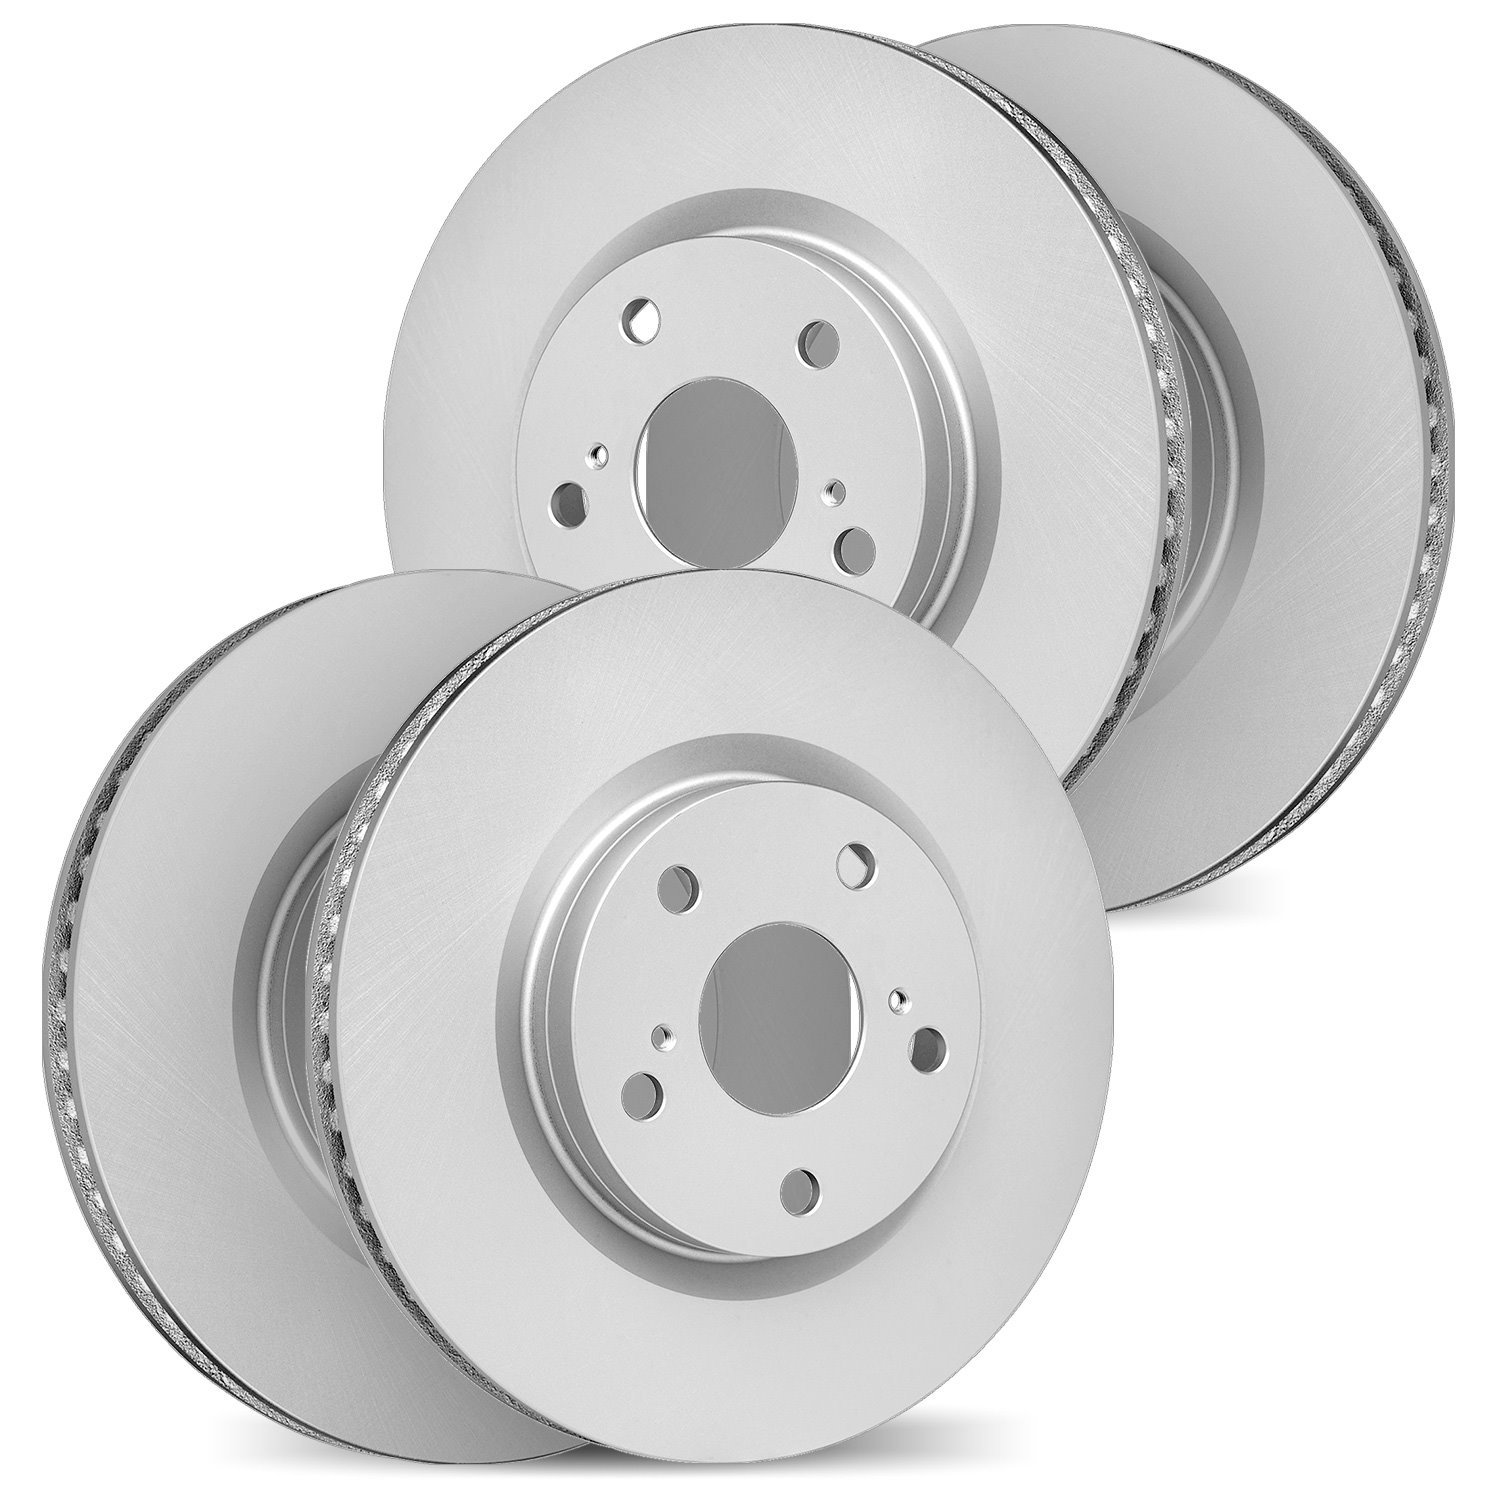 4004-68005 Geospec Brake Rotors, Fits Select Infiniti/Nissan, Position: Front and Rear